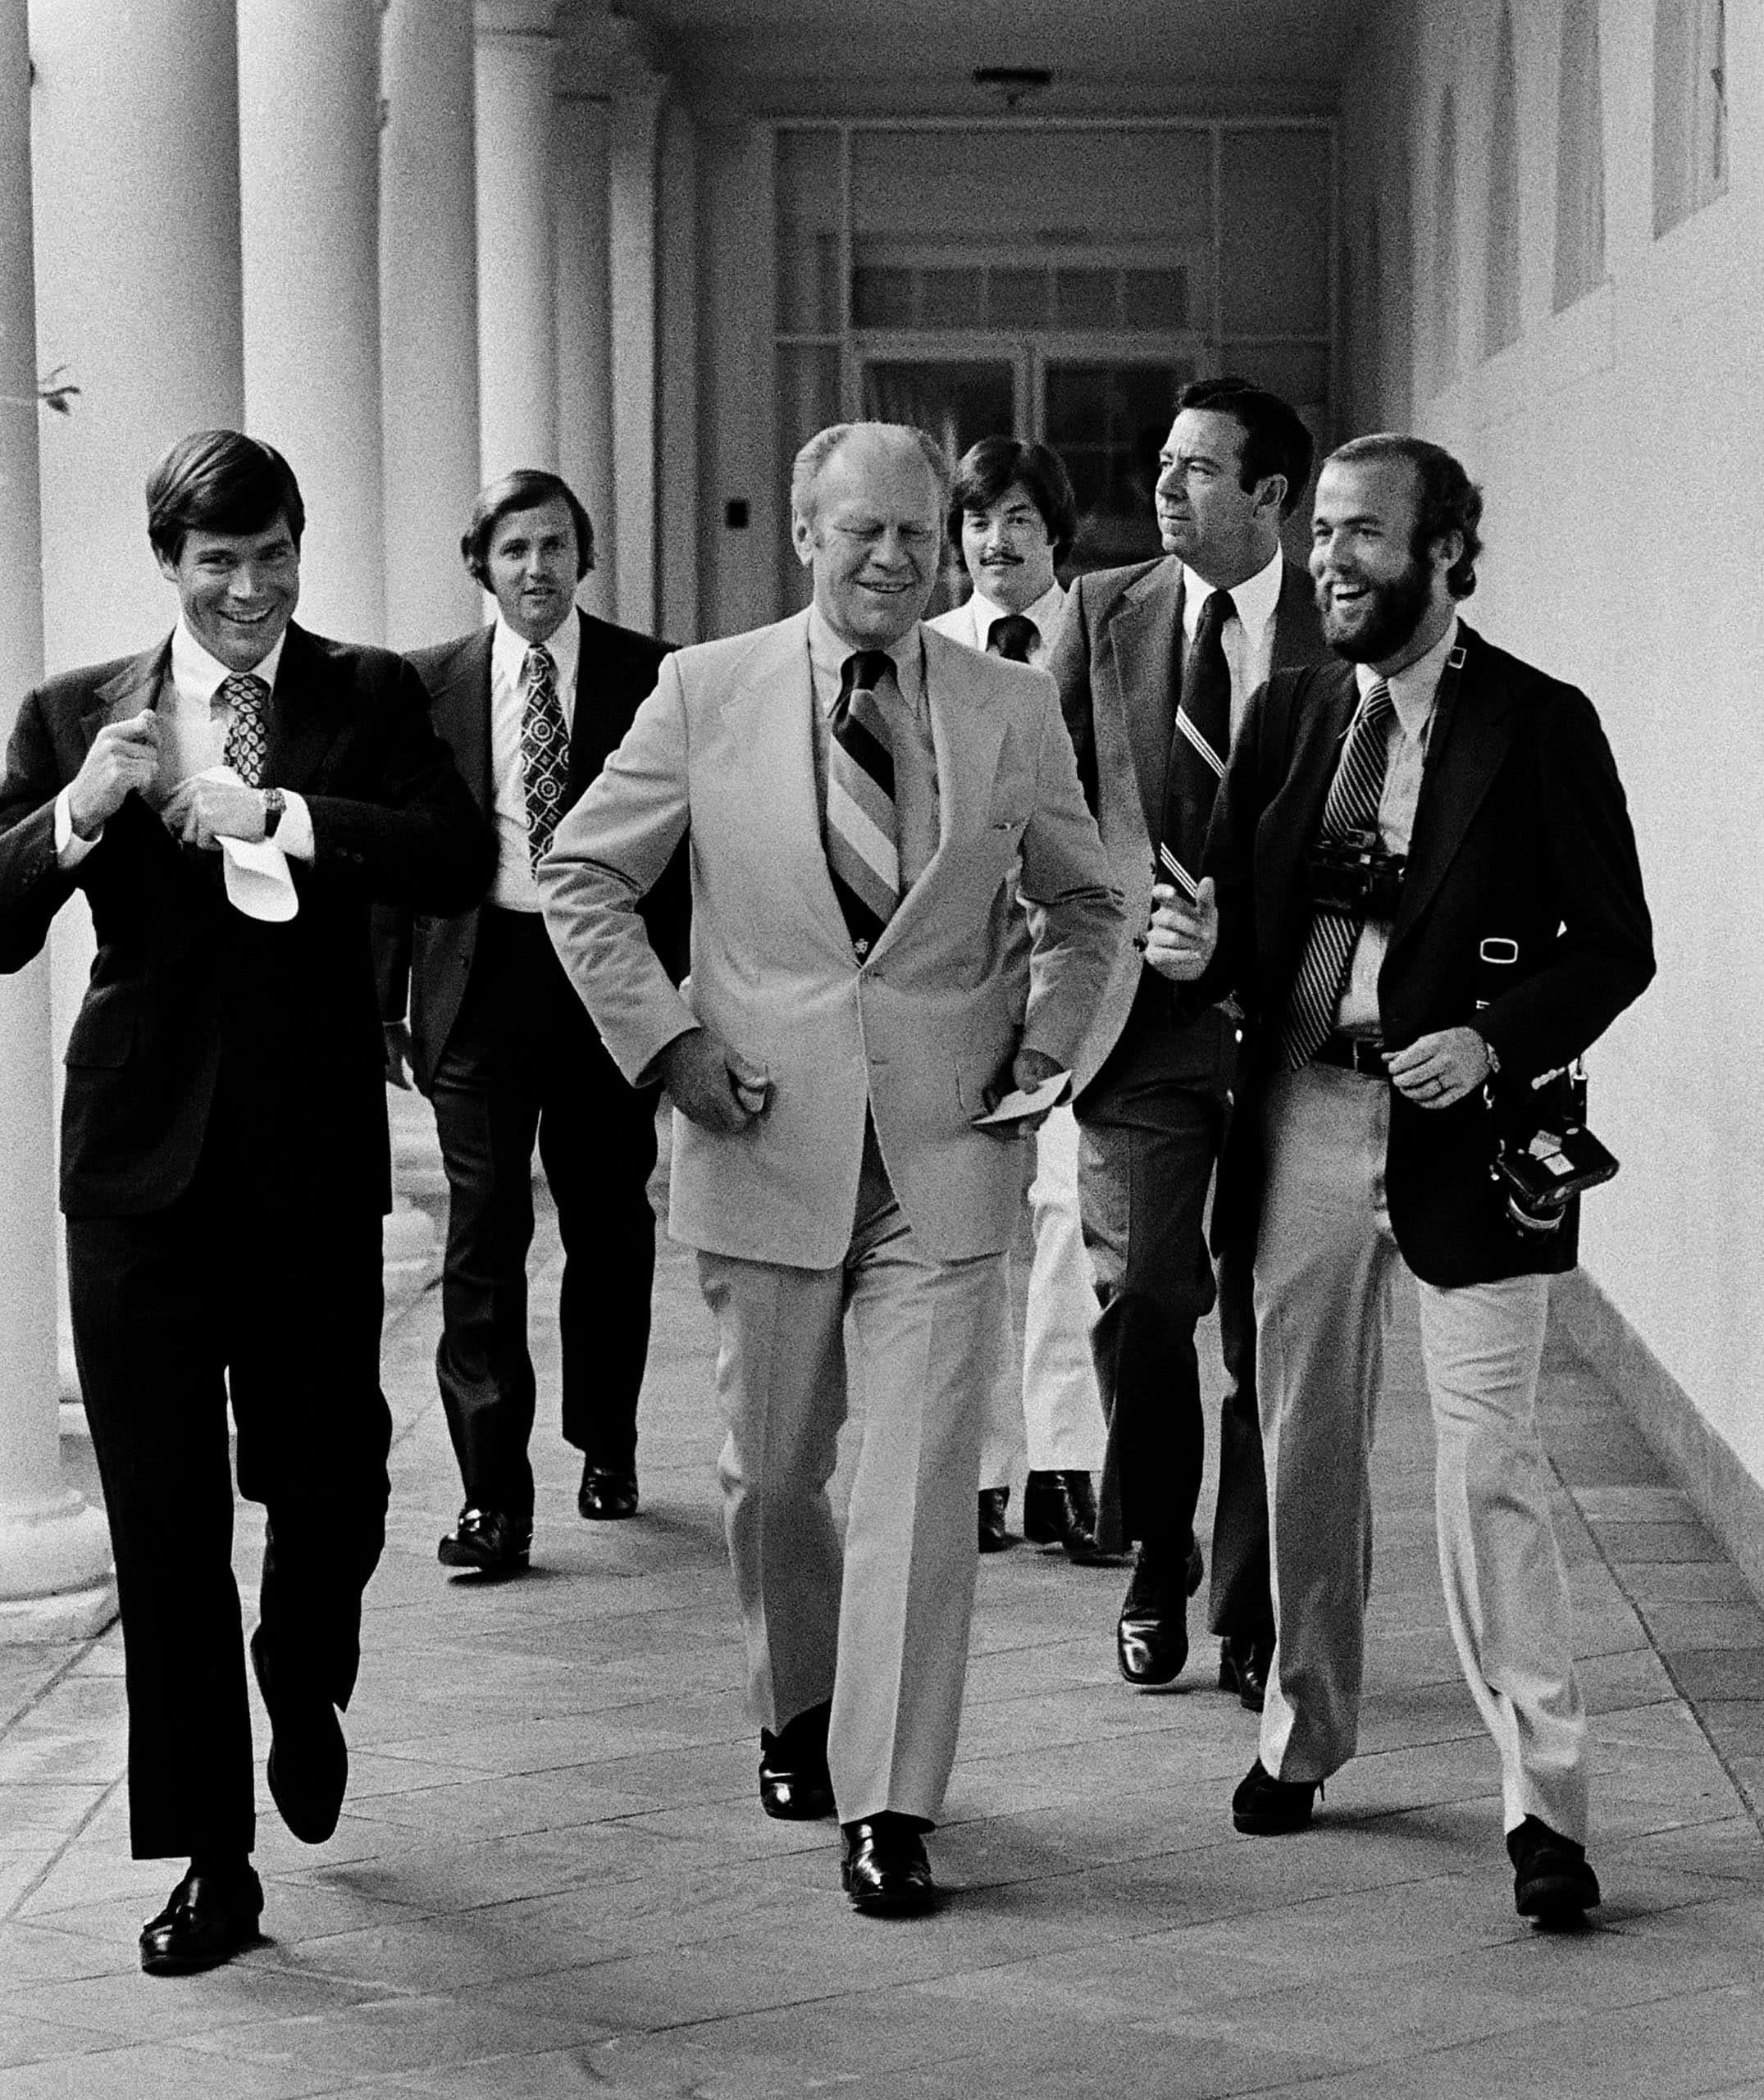 Kennerly and President Ford walk along the White House Colonnade, 1975